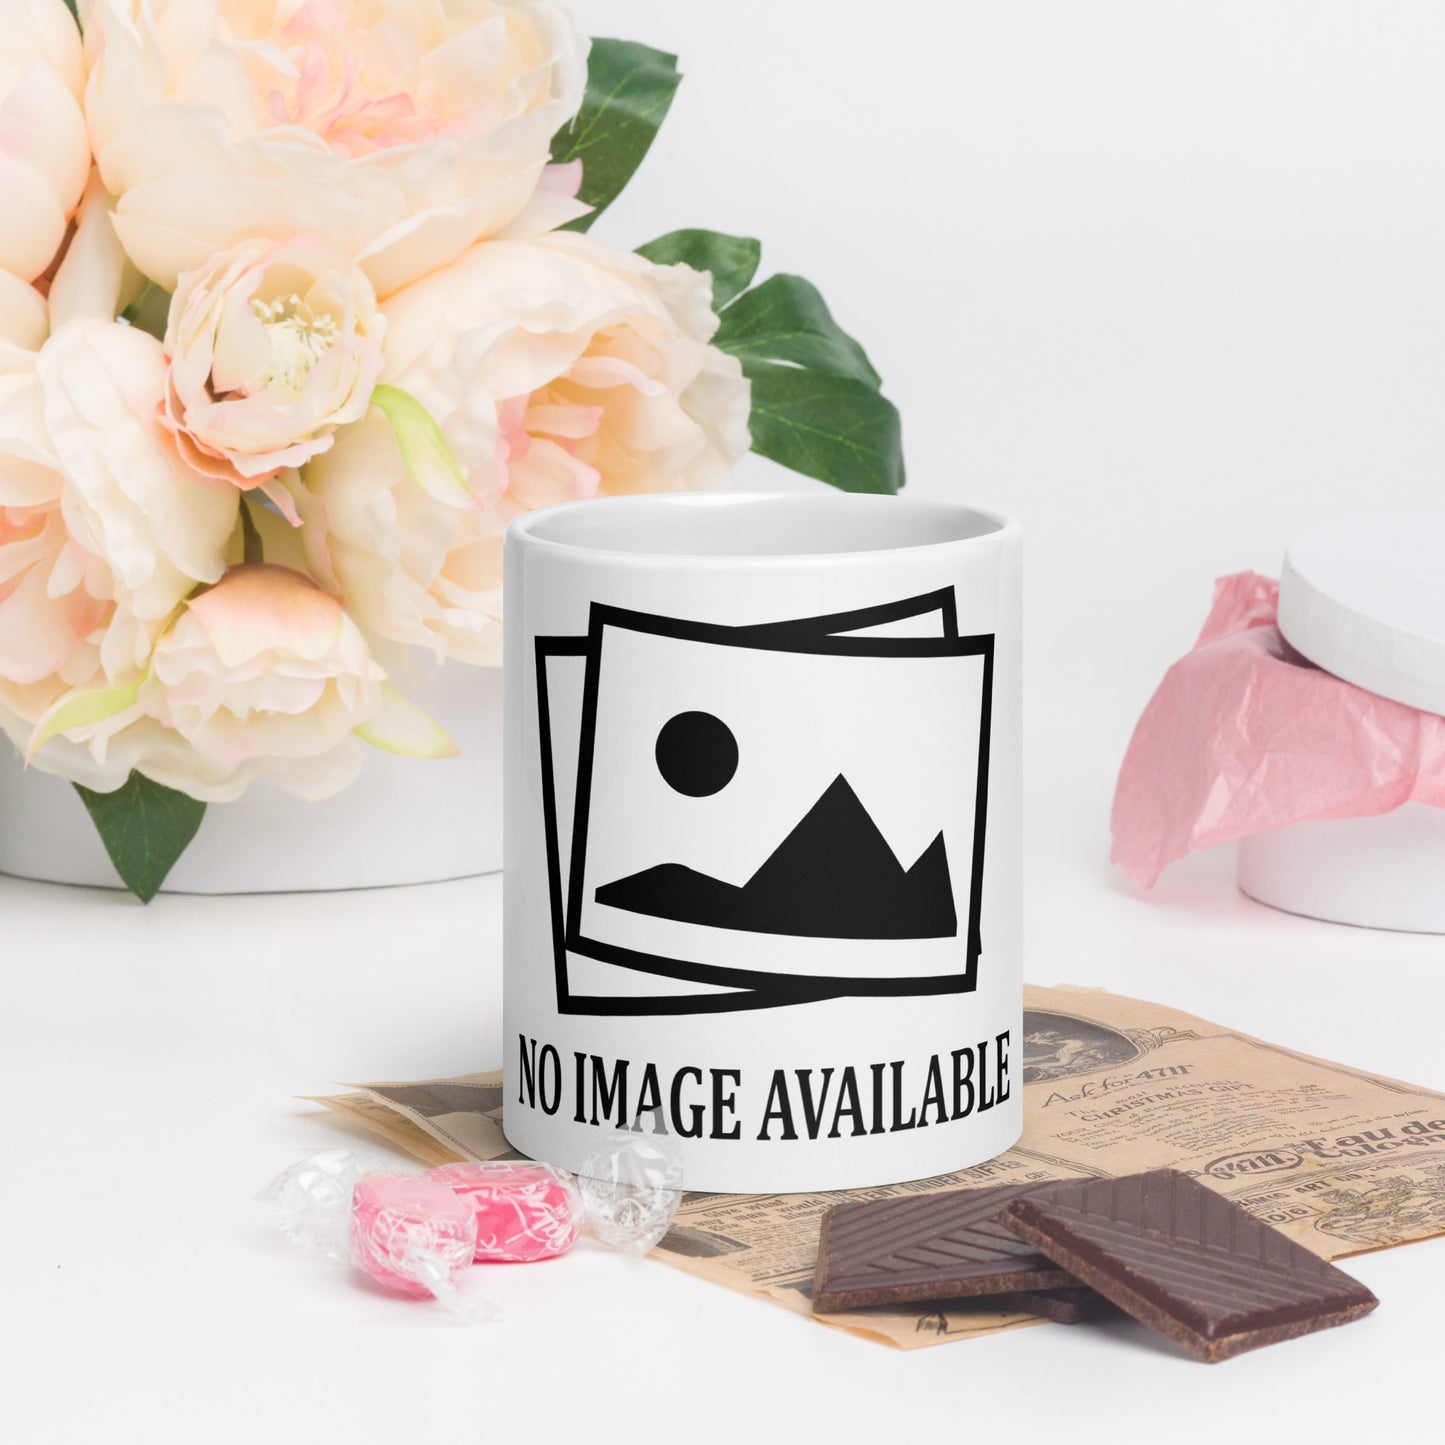 white mug with print and text "no image available"